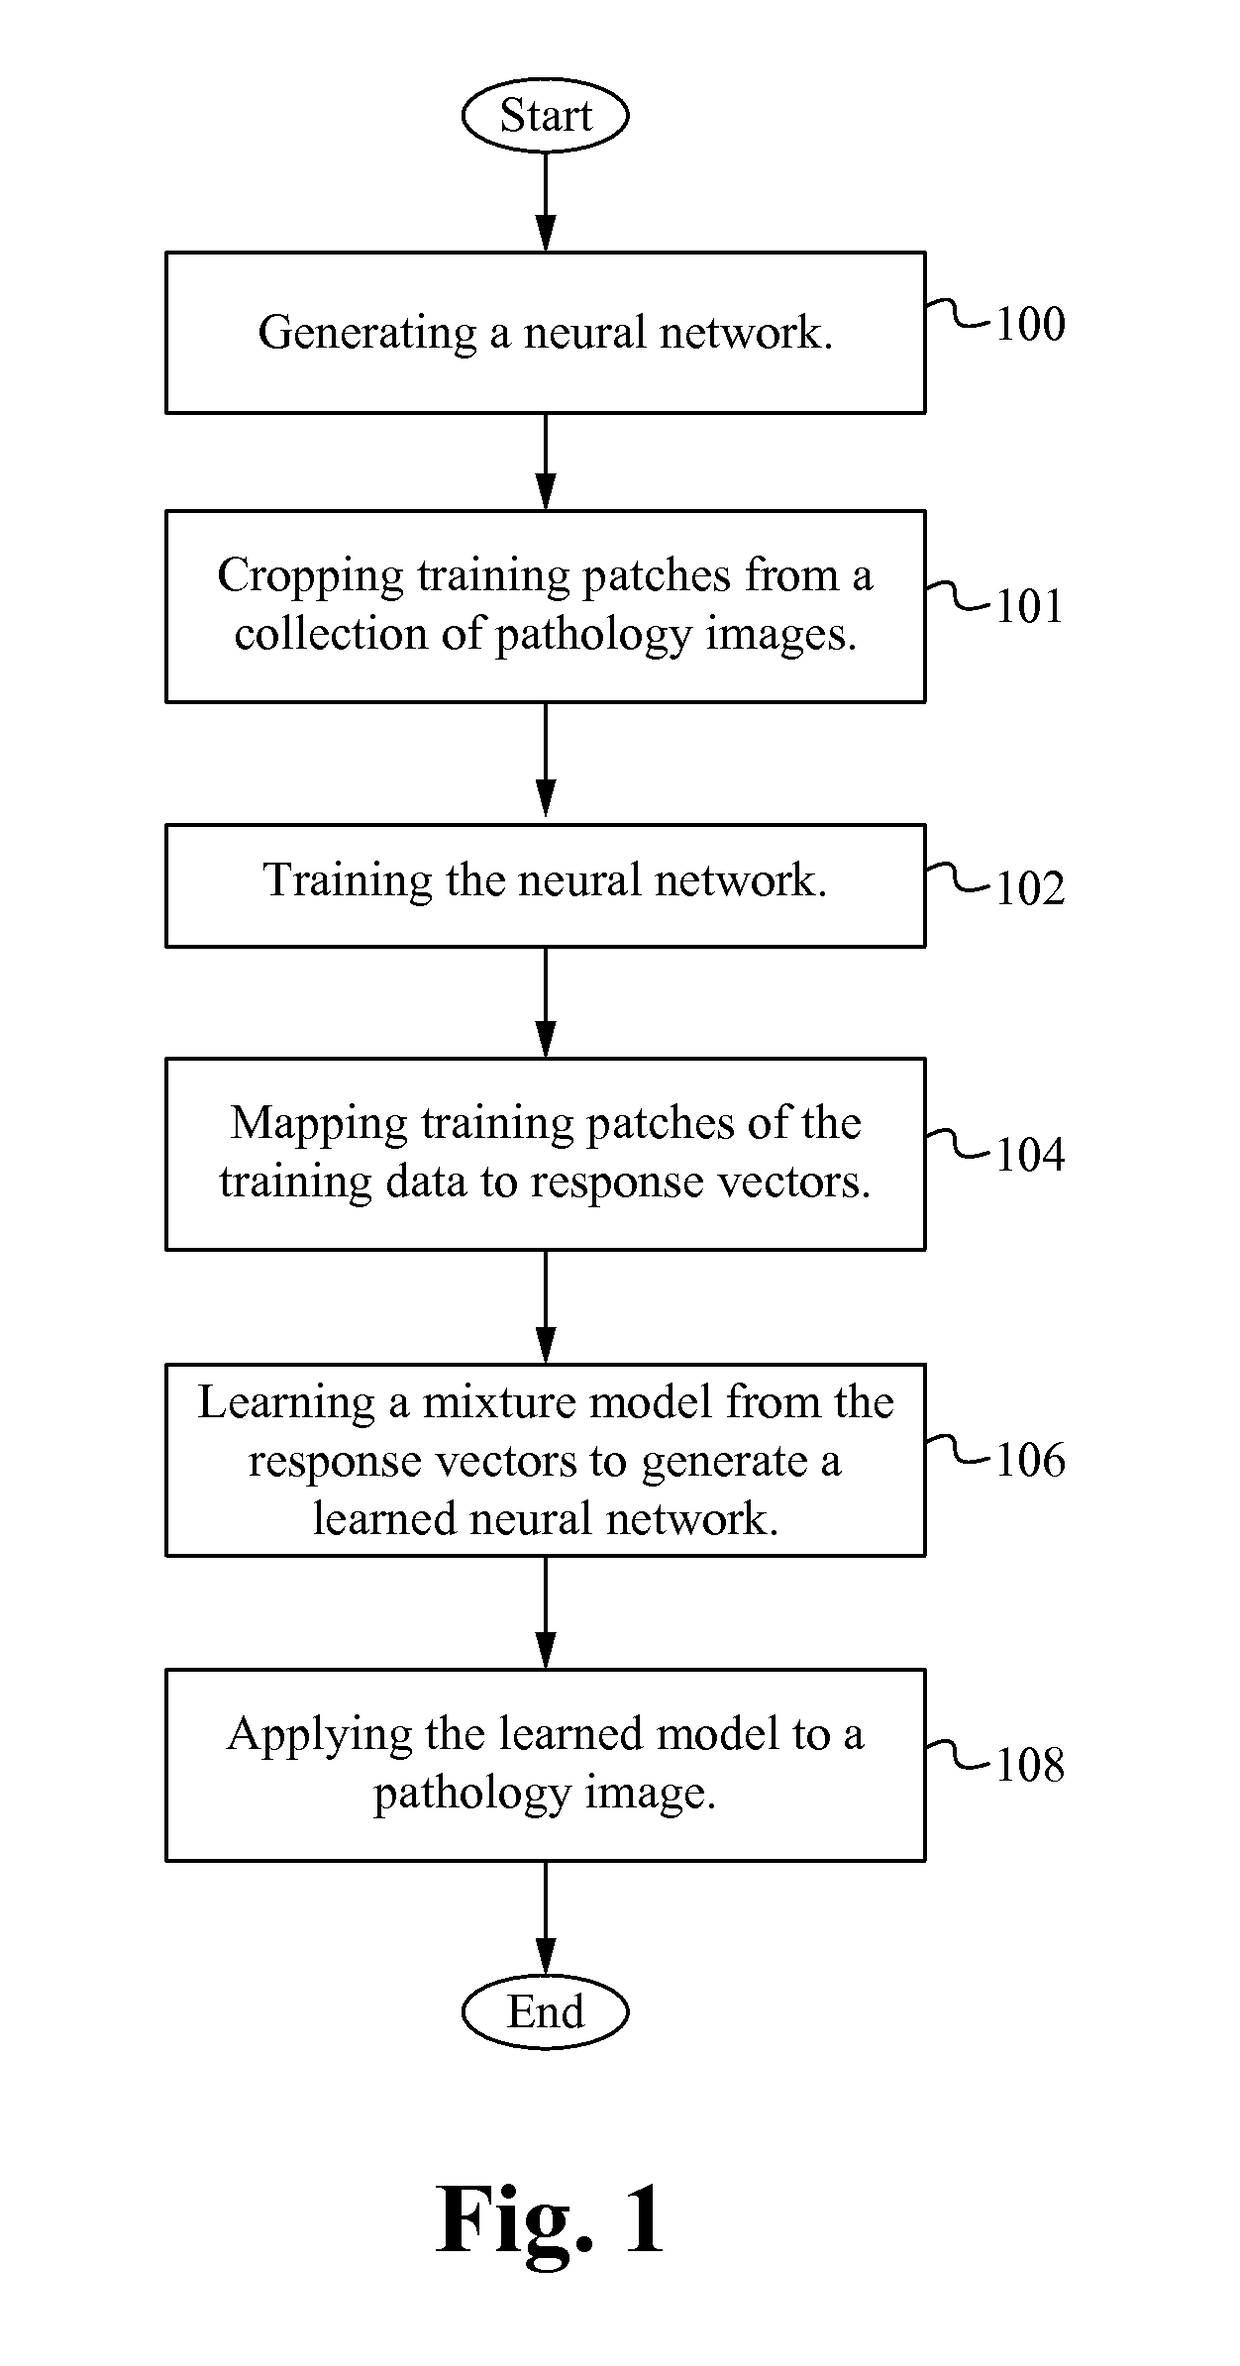 Characterizing pathology images with statistical analysis of local neural network responses